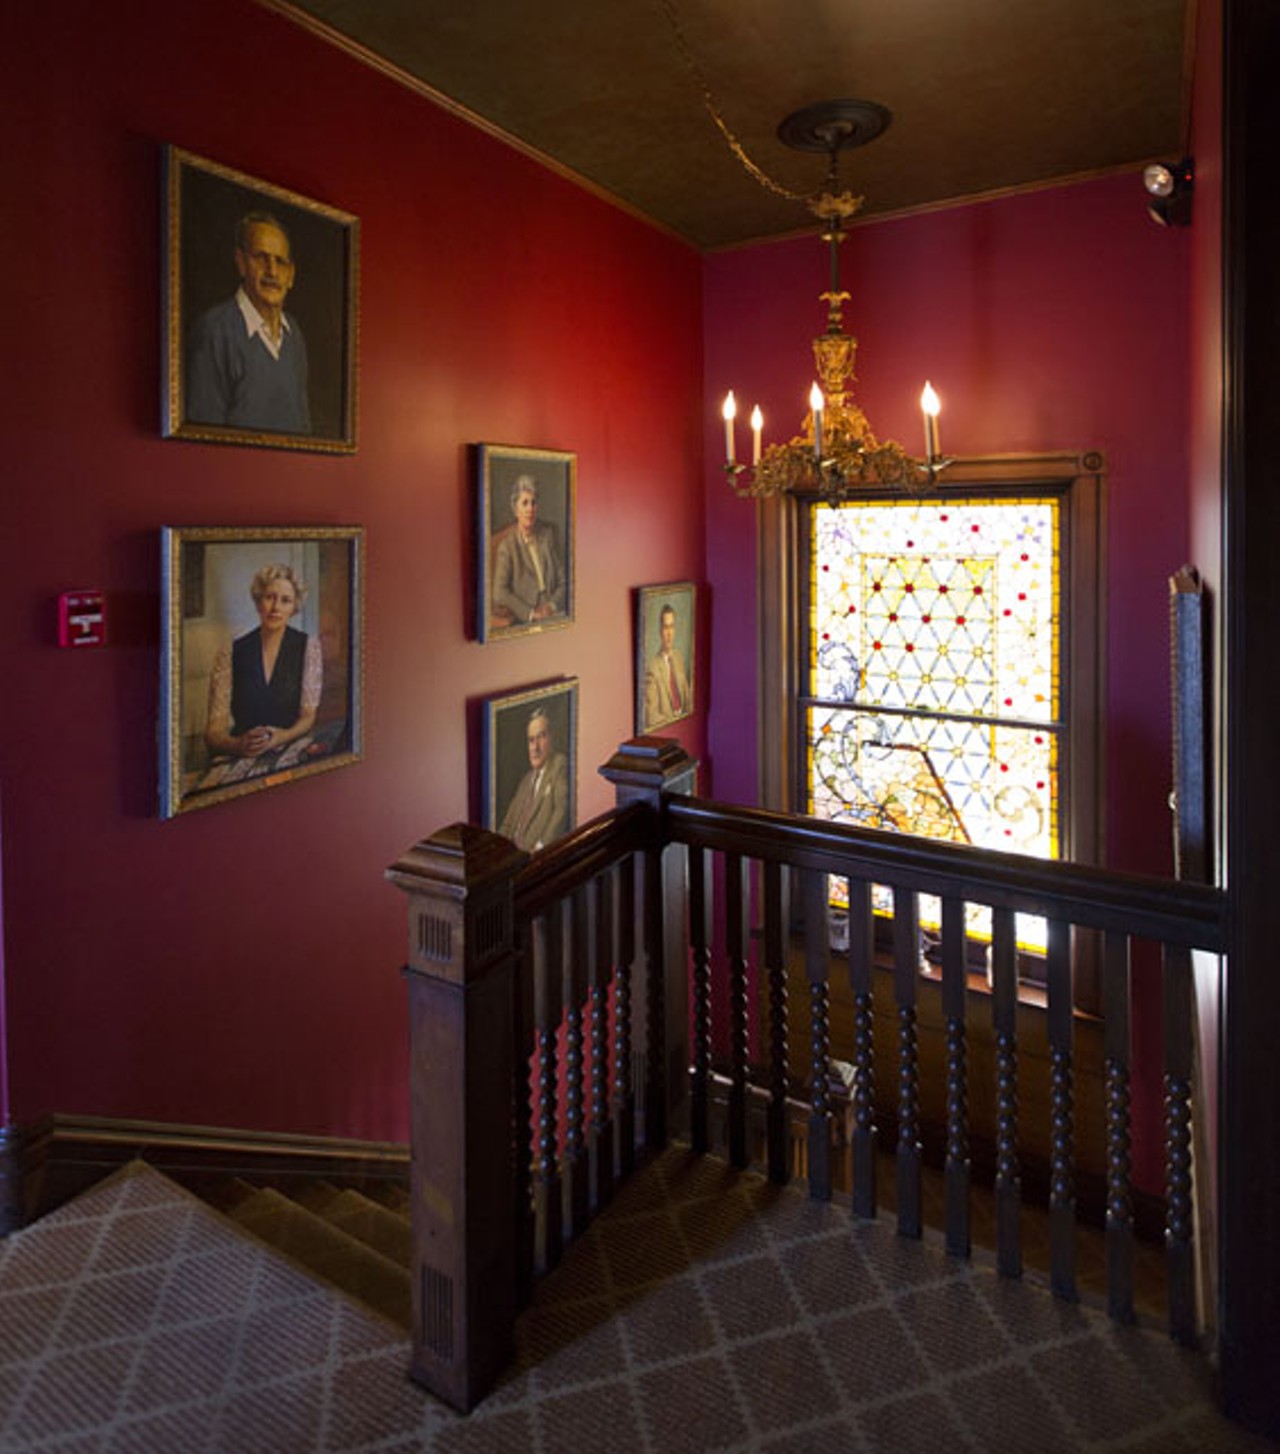 In the stairwell to the second floor are paintings of the owner and her family.